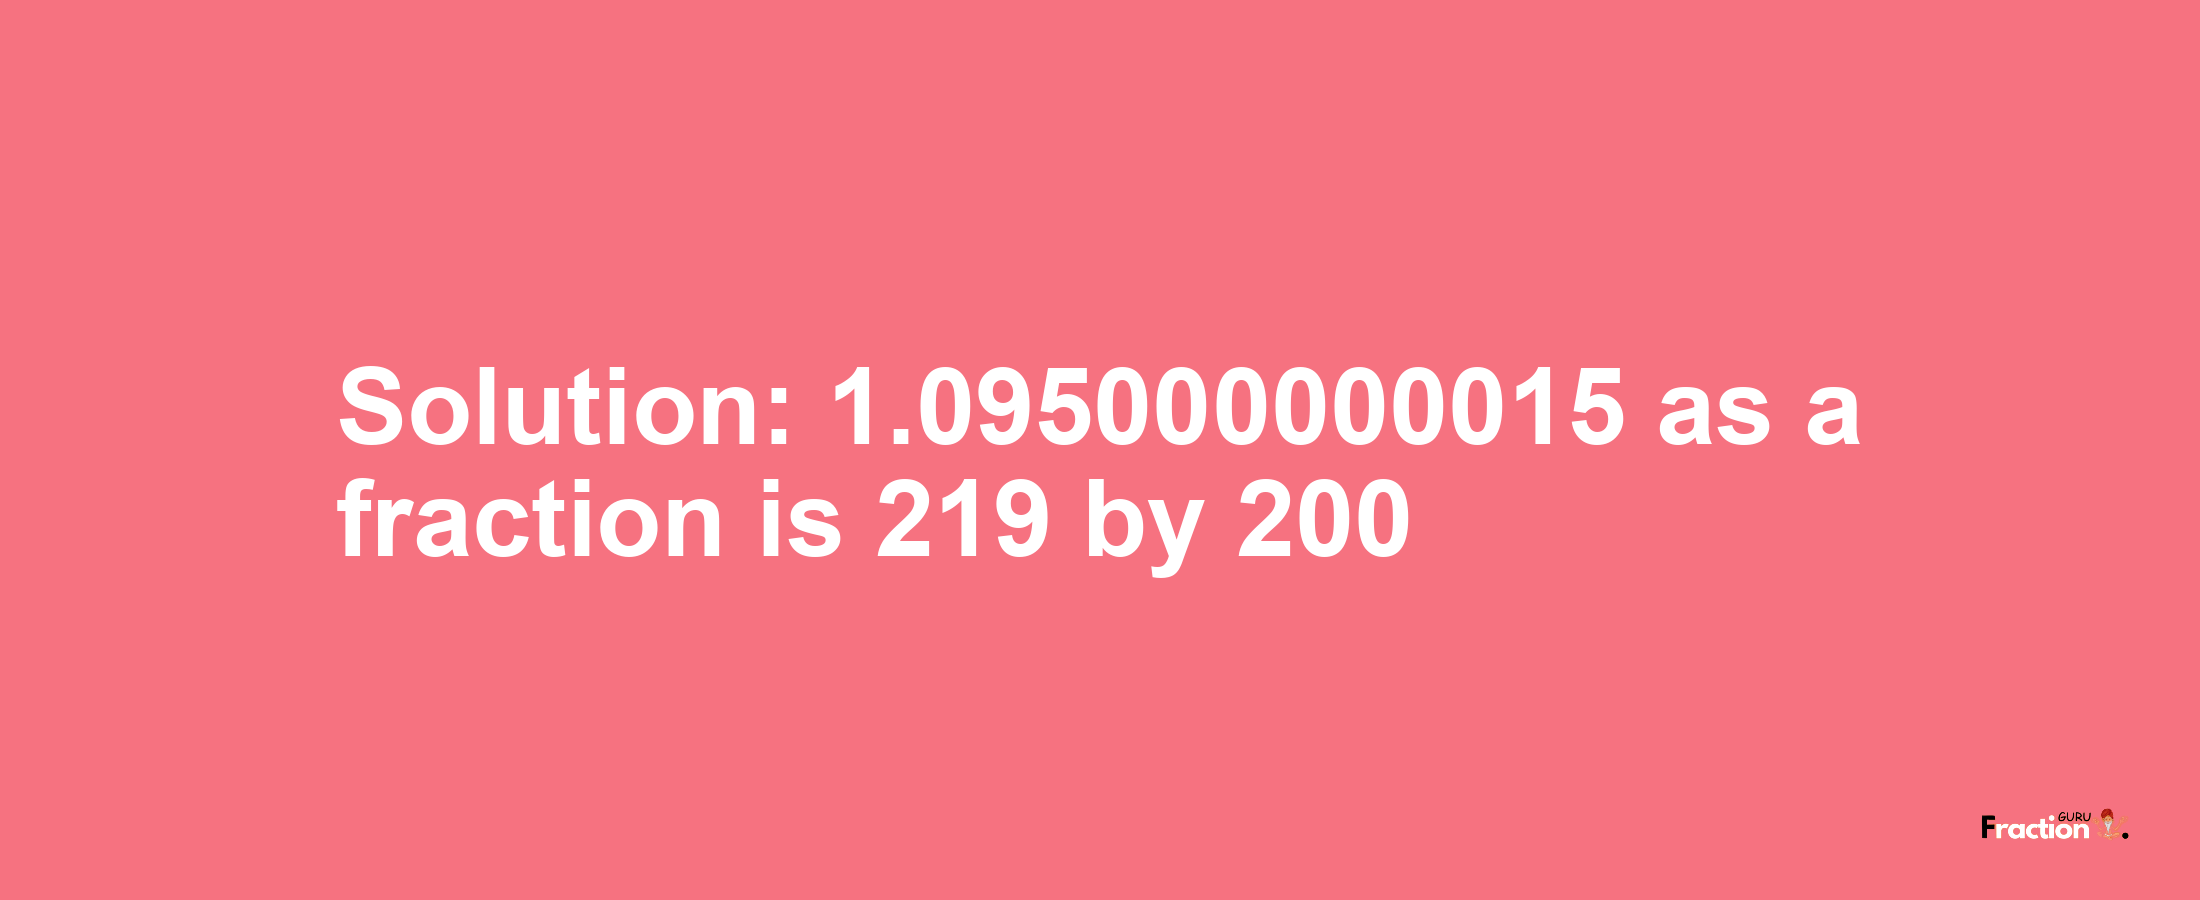 Solution:1.095000000015 as a fraction is 219/200